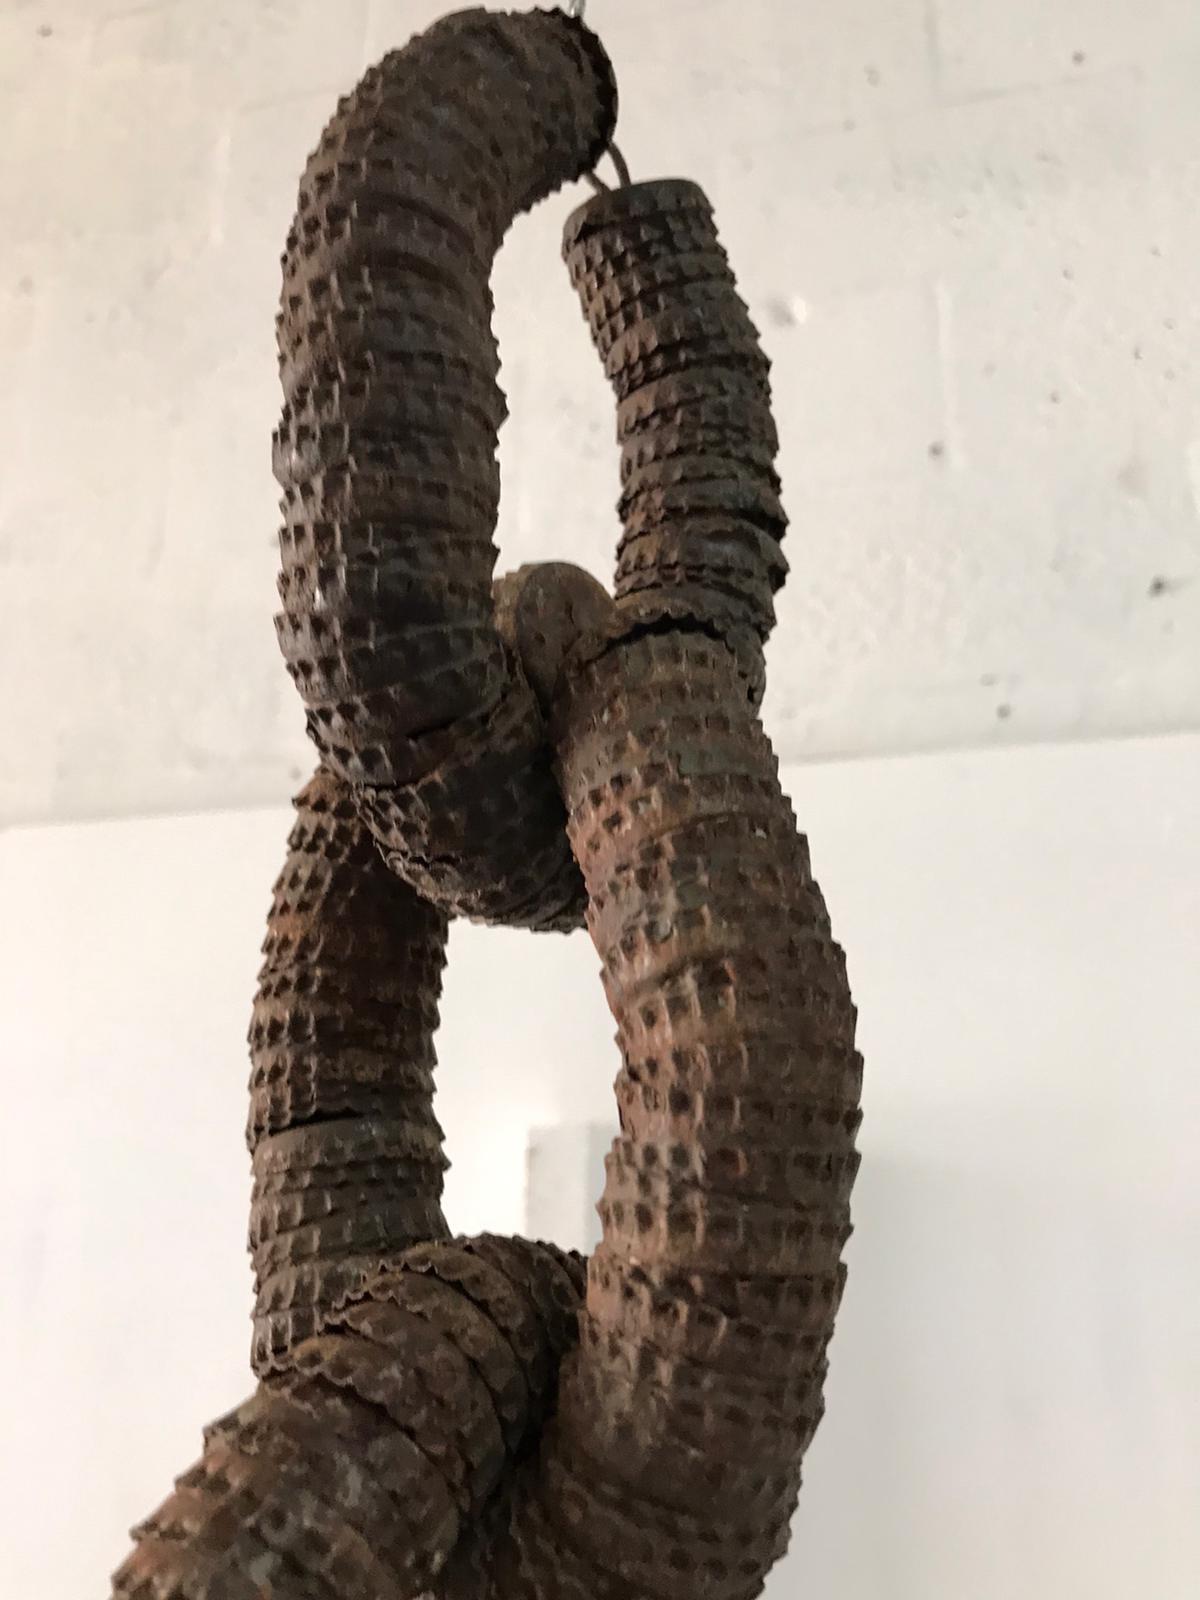 This Folk Art hanging sculpture made of vintage bottle caps hand strewn in to this chain-link piece of art. This can be hung from any height, leaving the base to coil around in a natural and artistic way. This is not new, truly an antique piece of